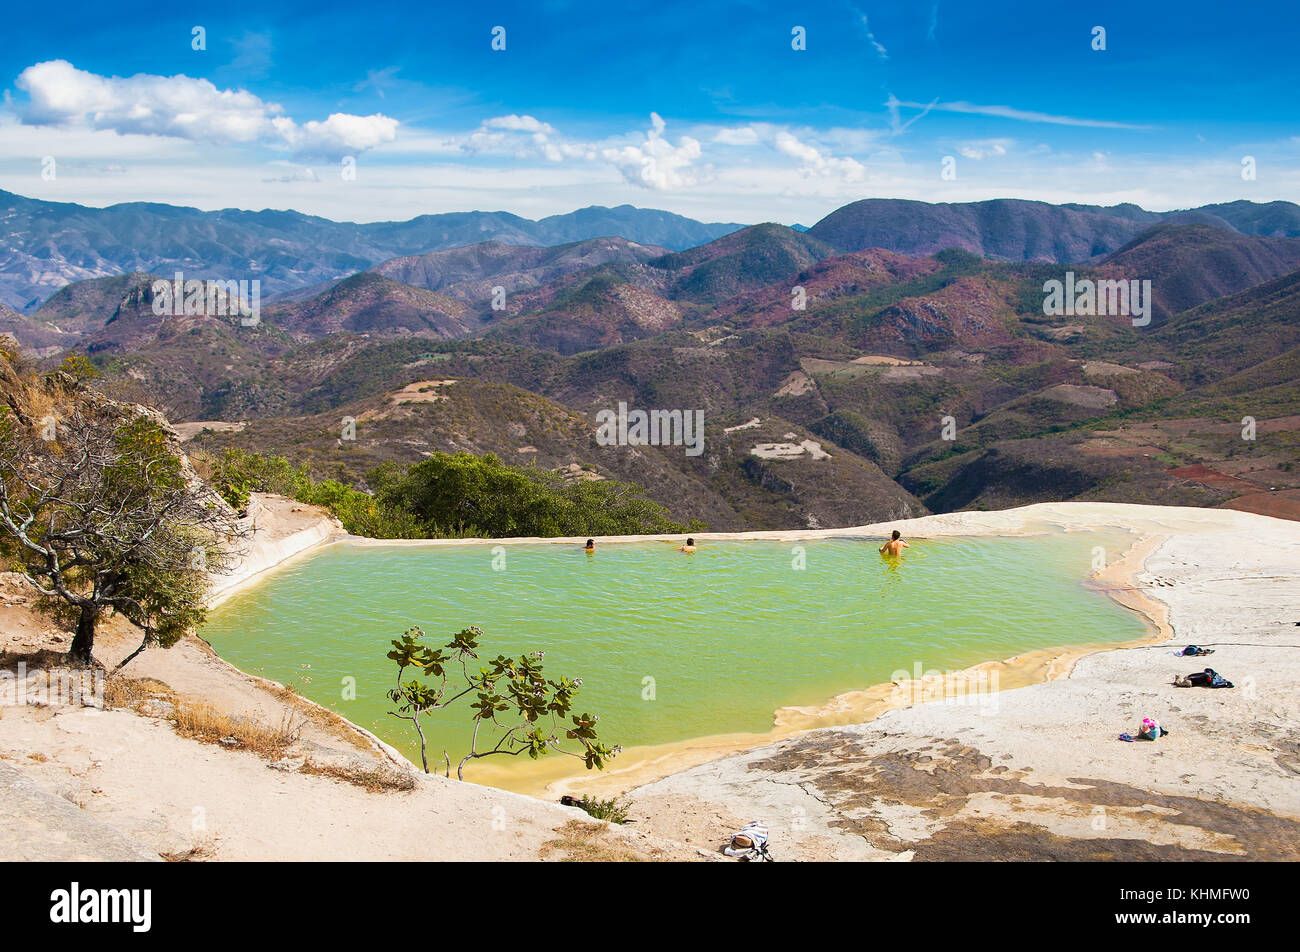 Thermal Mineral Spring Hierve el Agua, natural rock formations in Oaxaca, Mexico. Stock Photo